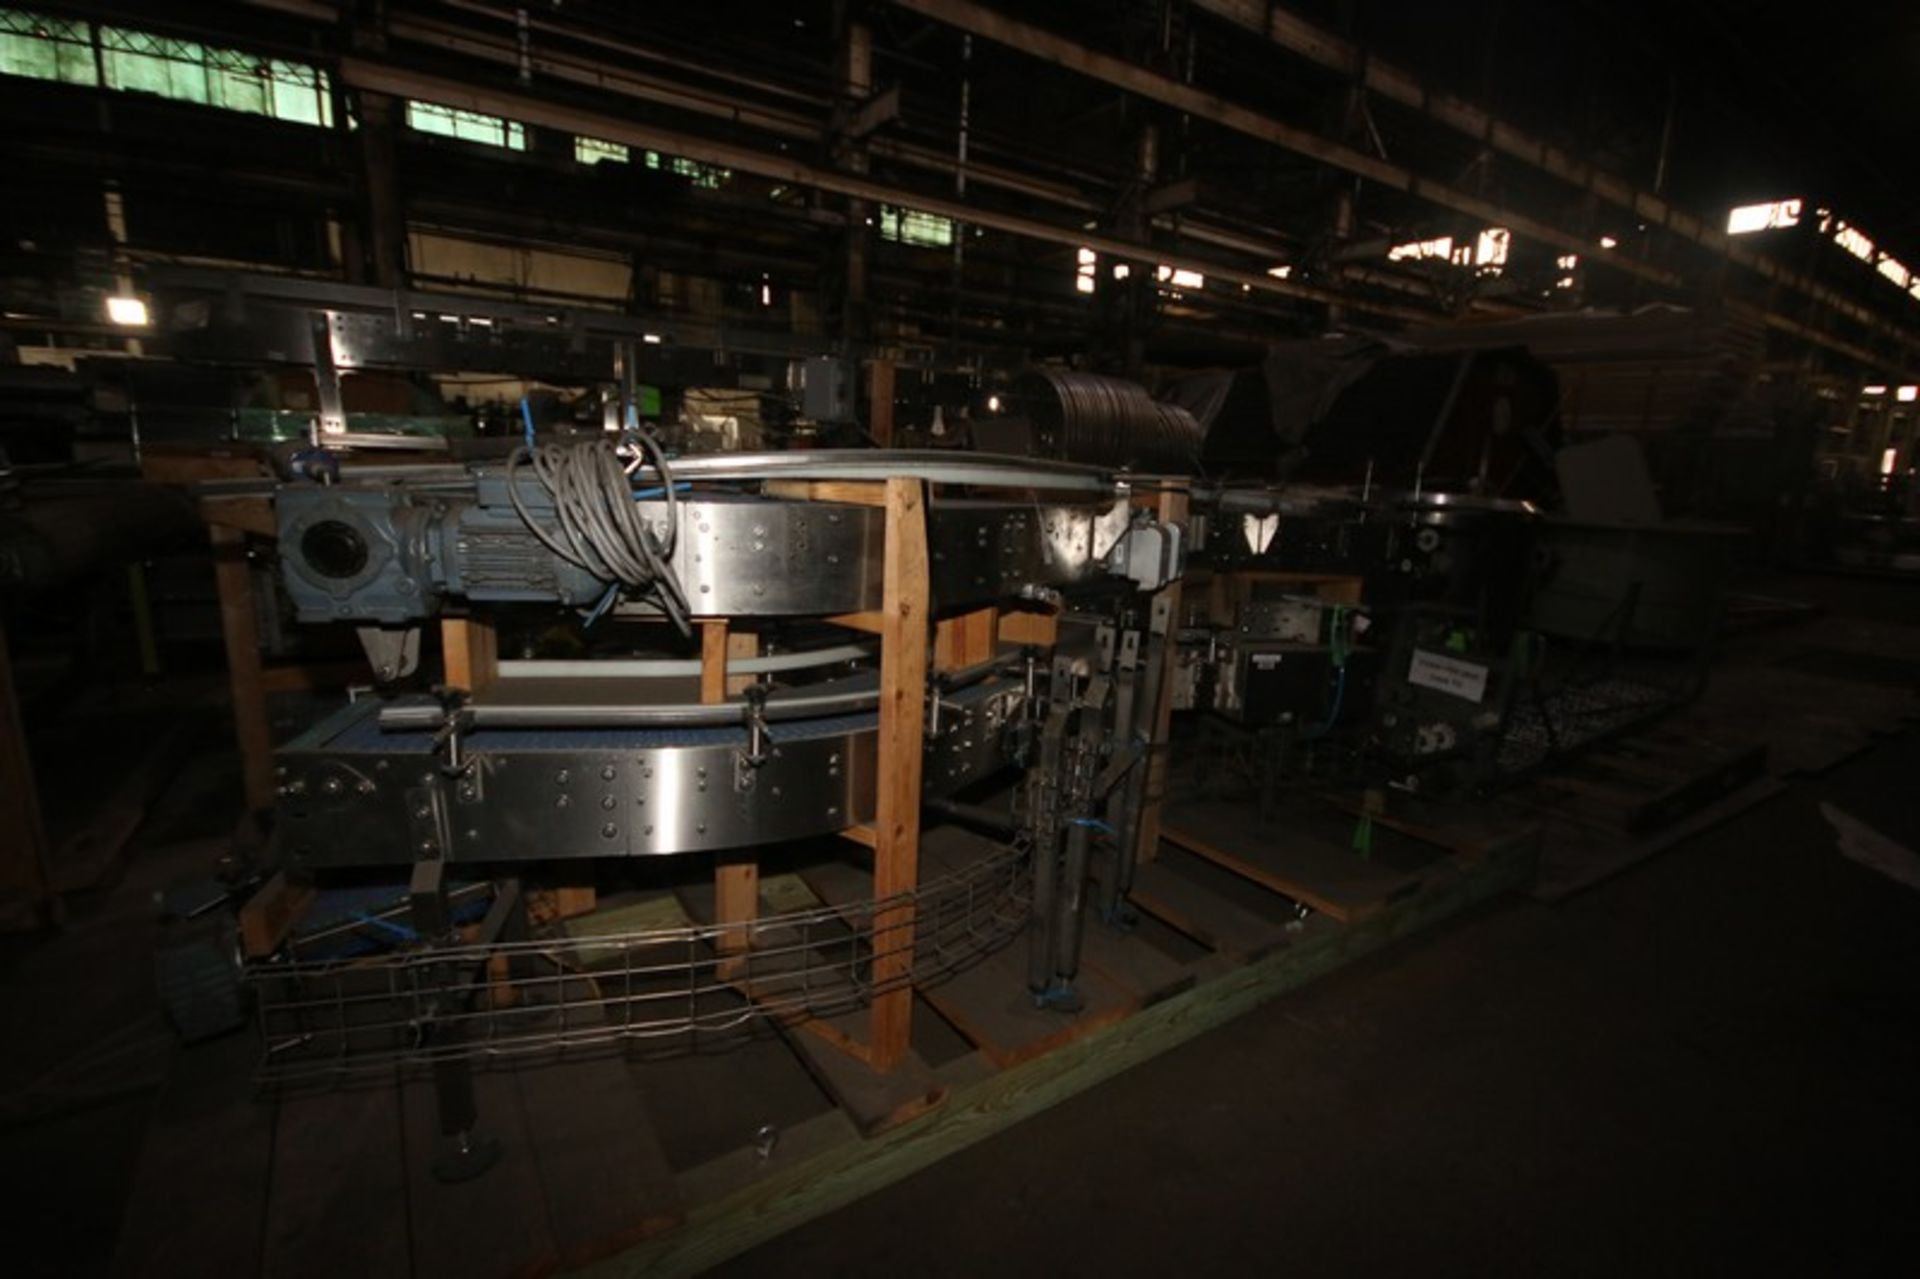 Skid with Assorted S/S Case Conveyor Sections, Most Aprox. 12" W with Intralux Belt - Image 3 of 6